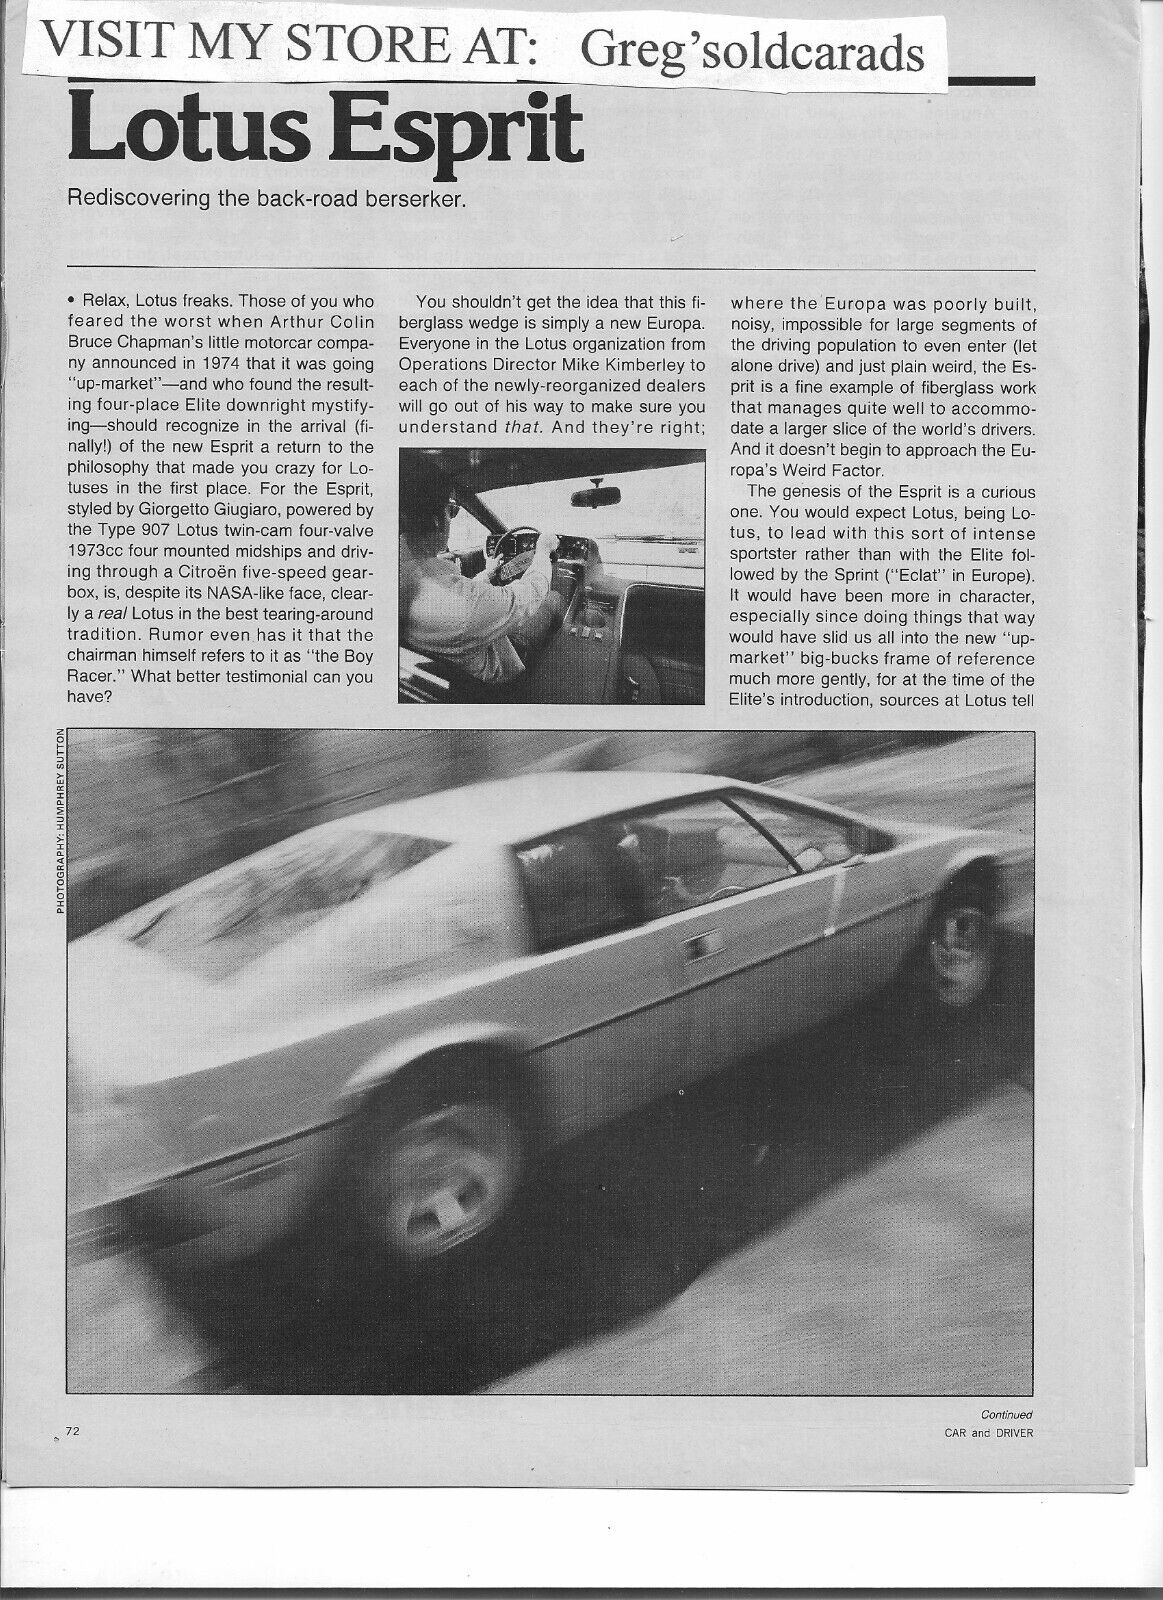 Original 1977 Lotus Esprit 6 page Road Test, in print ad category